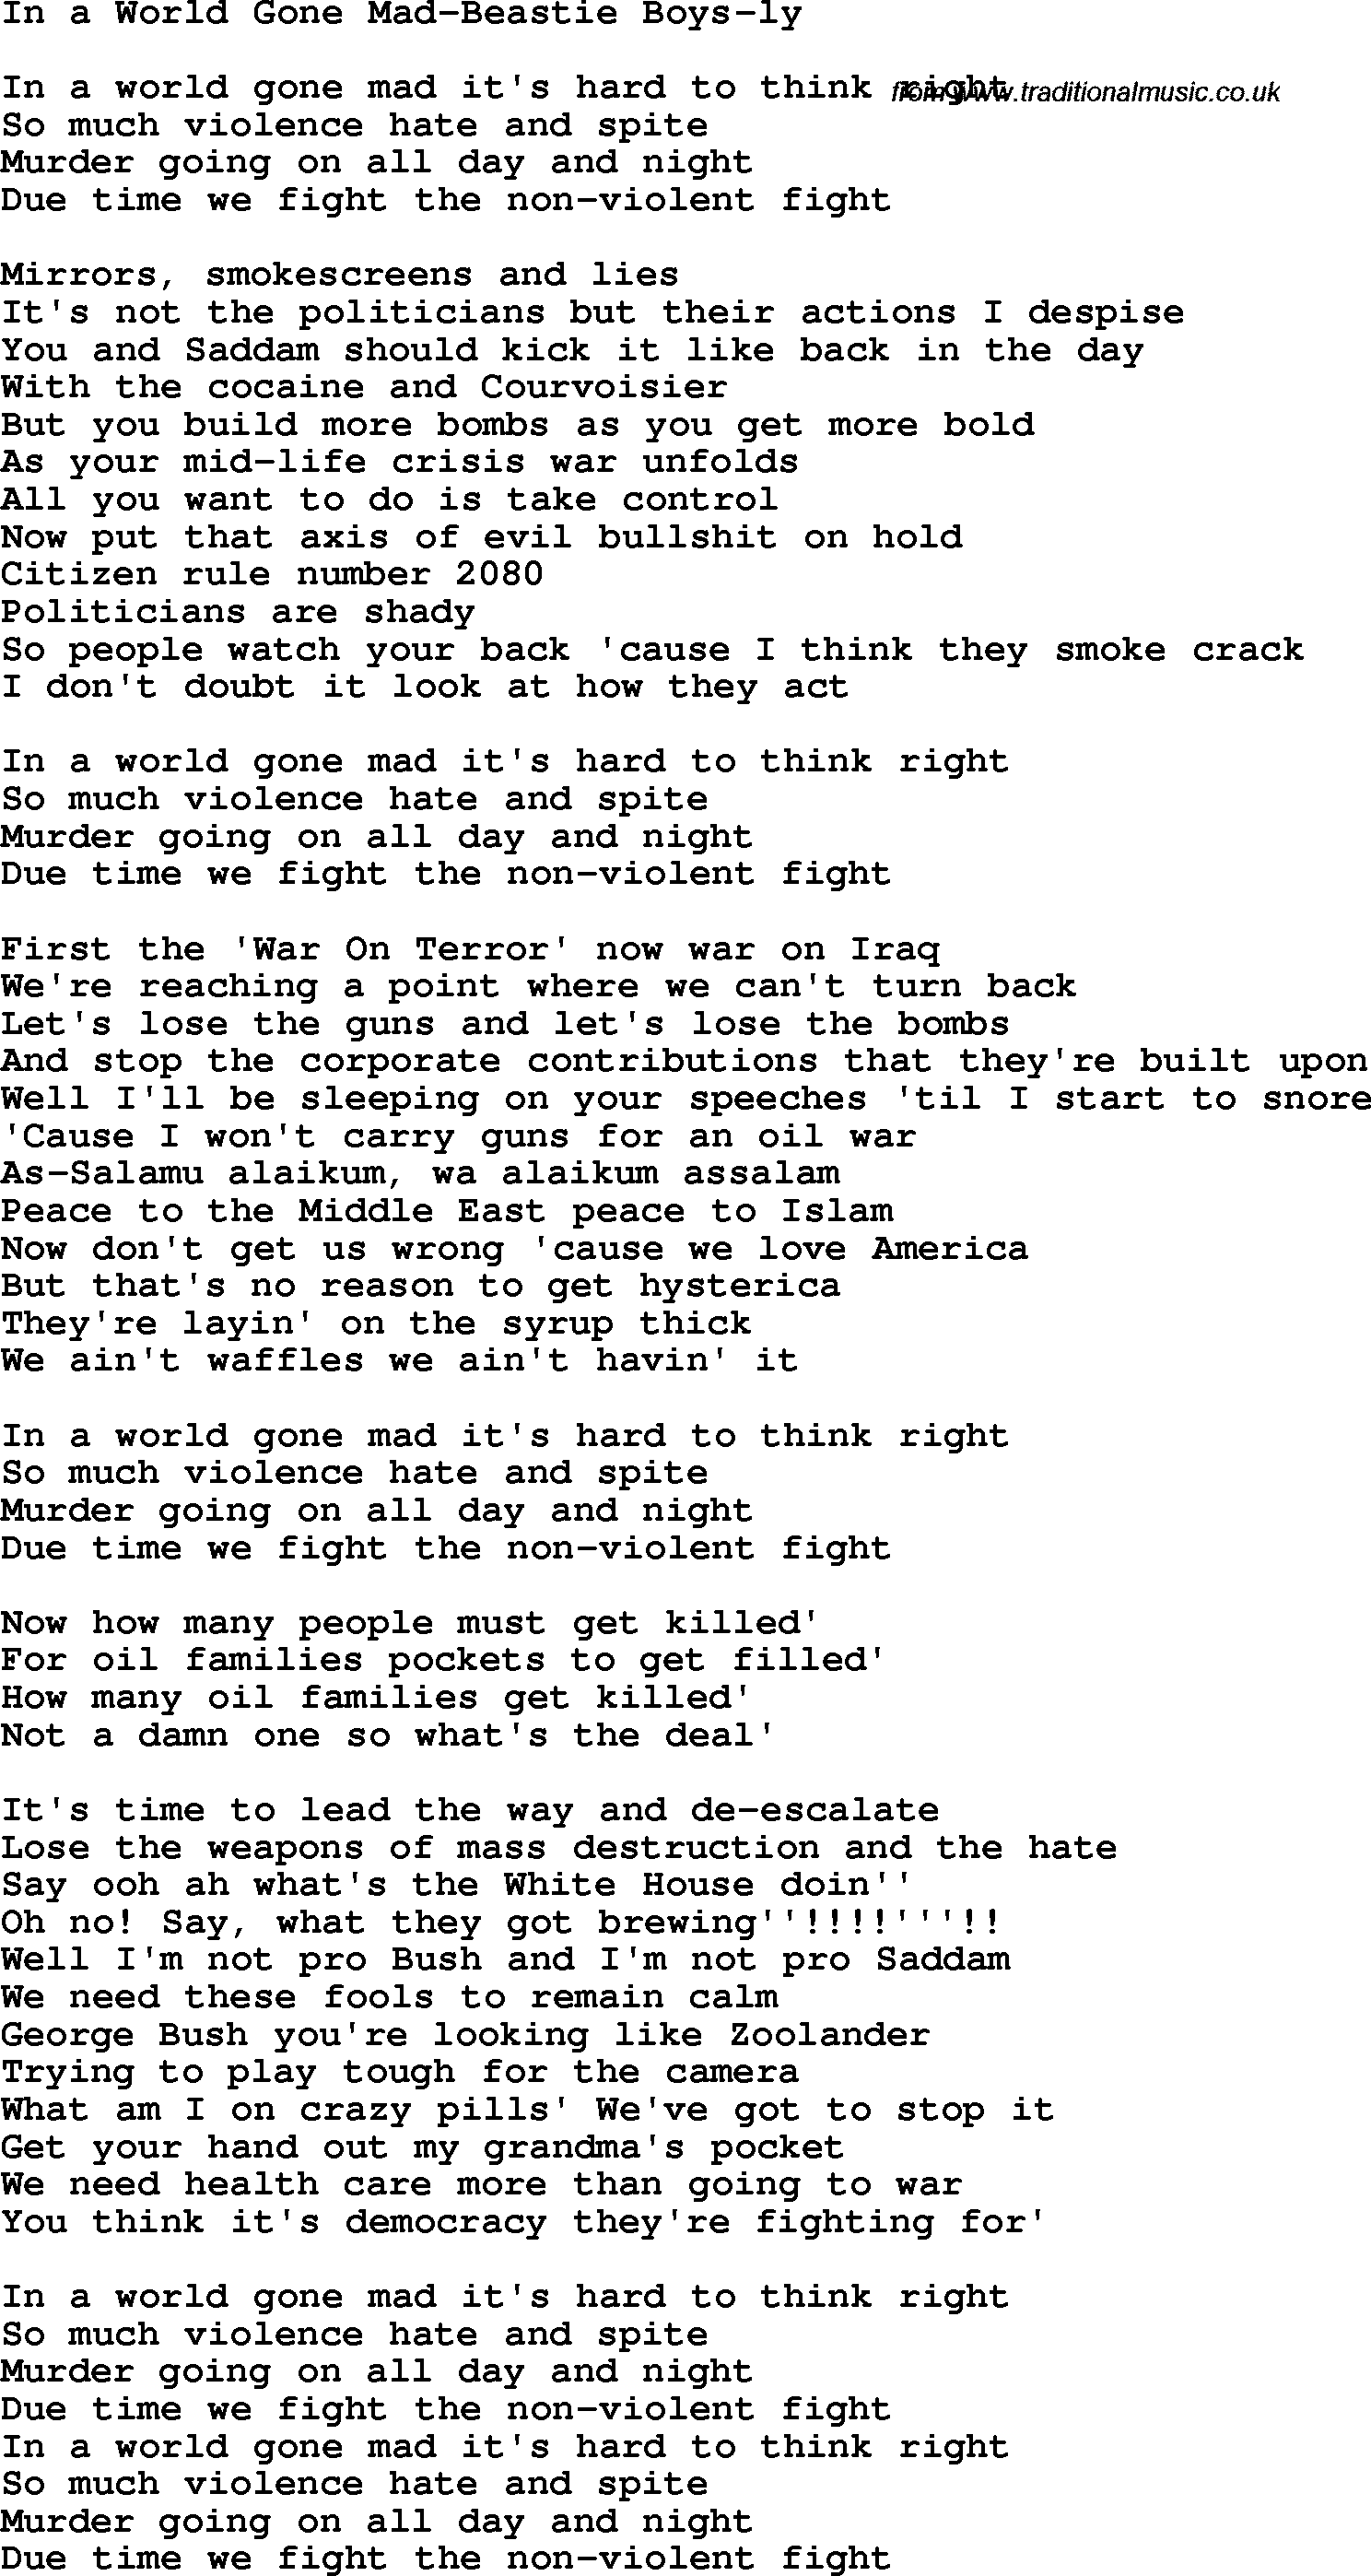 Protest Song In A World Gone Mad-Beastie Boys lyrics and chords